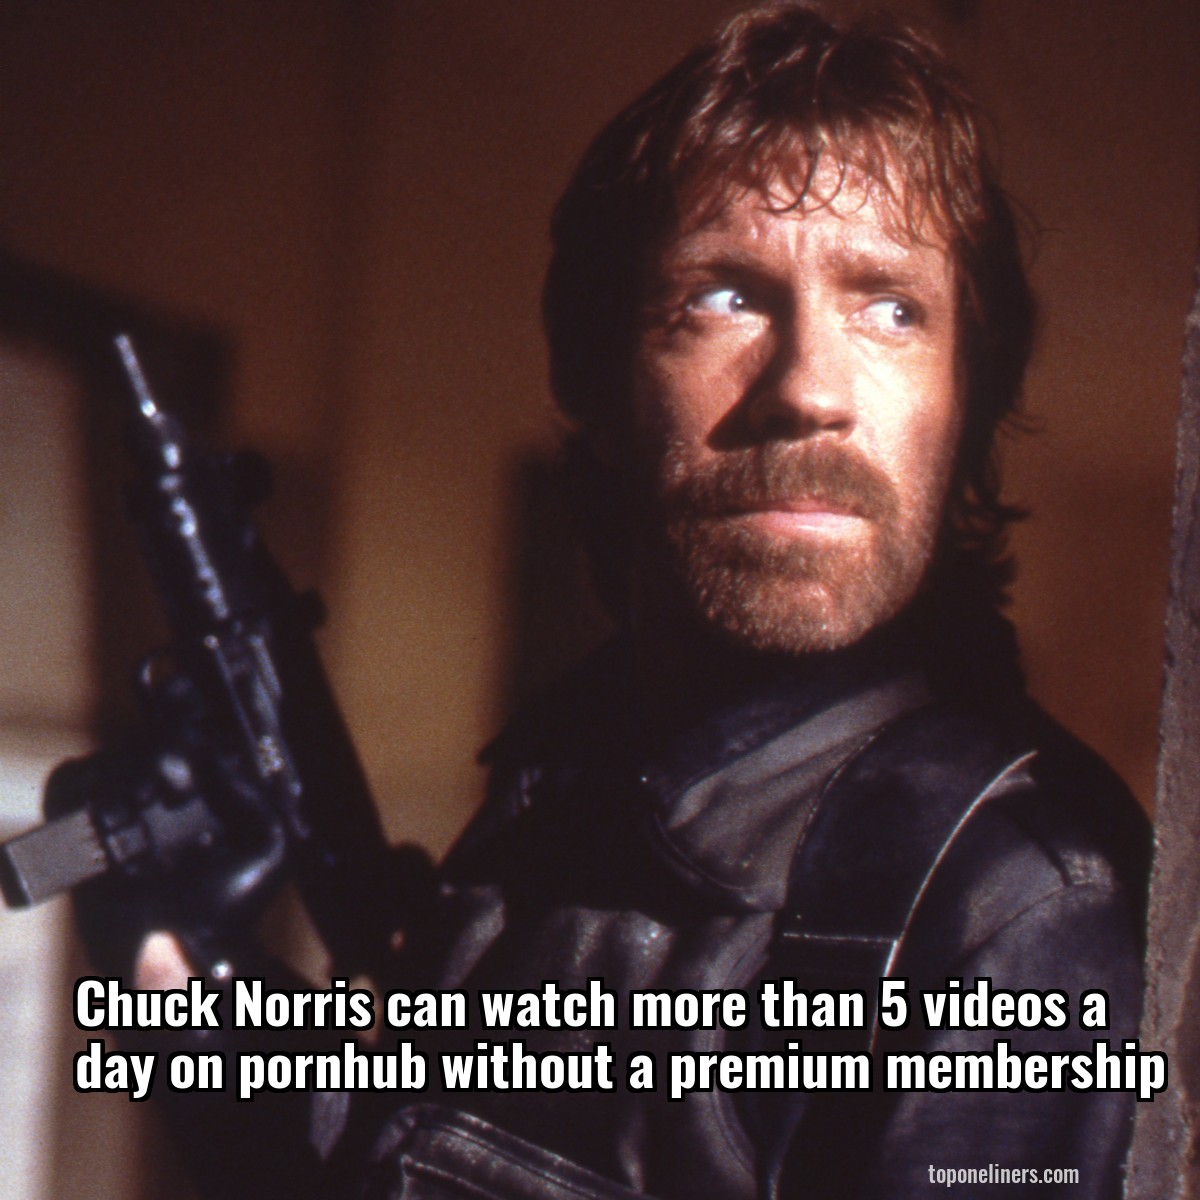 Chuck Norris can watch more than 5 videos a day on pornhub without a premium membership